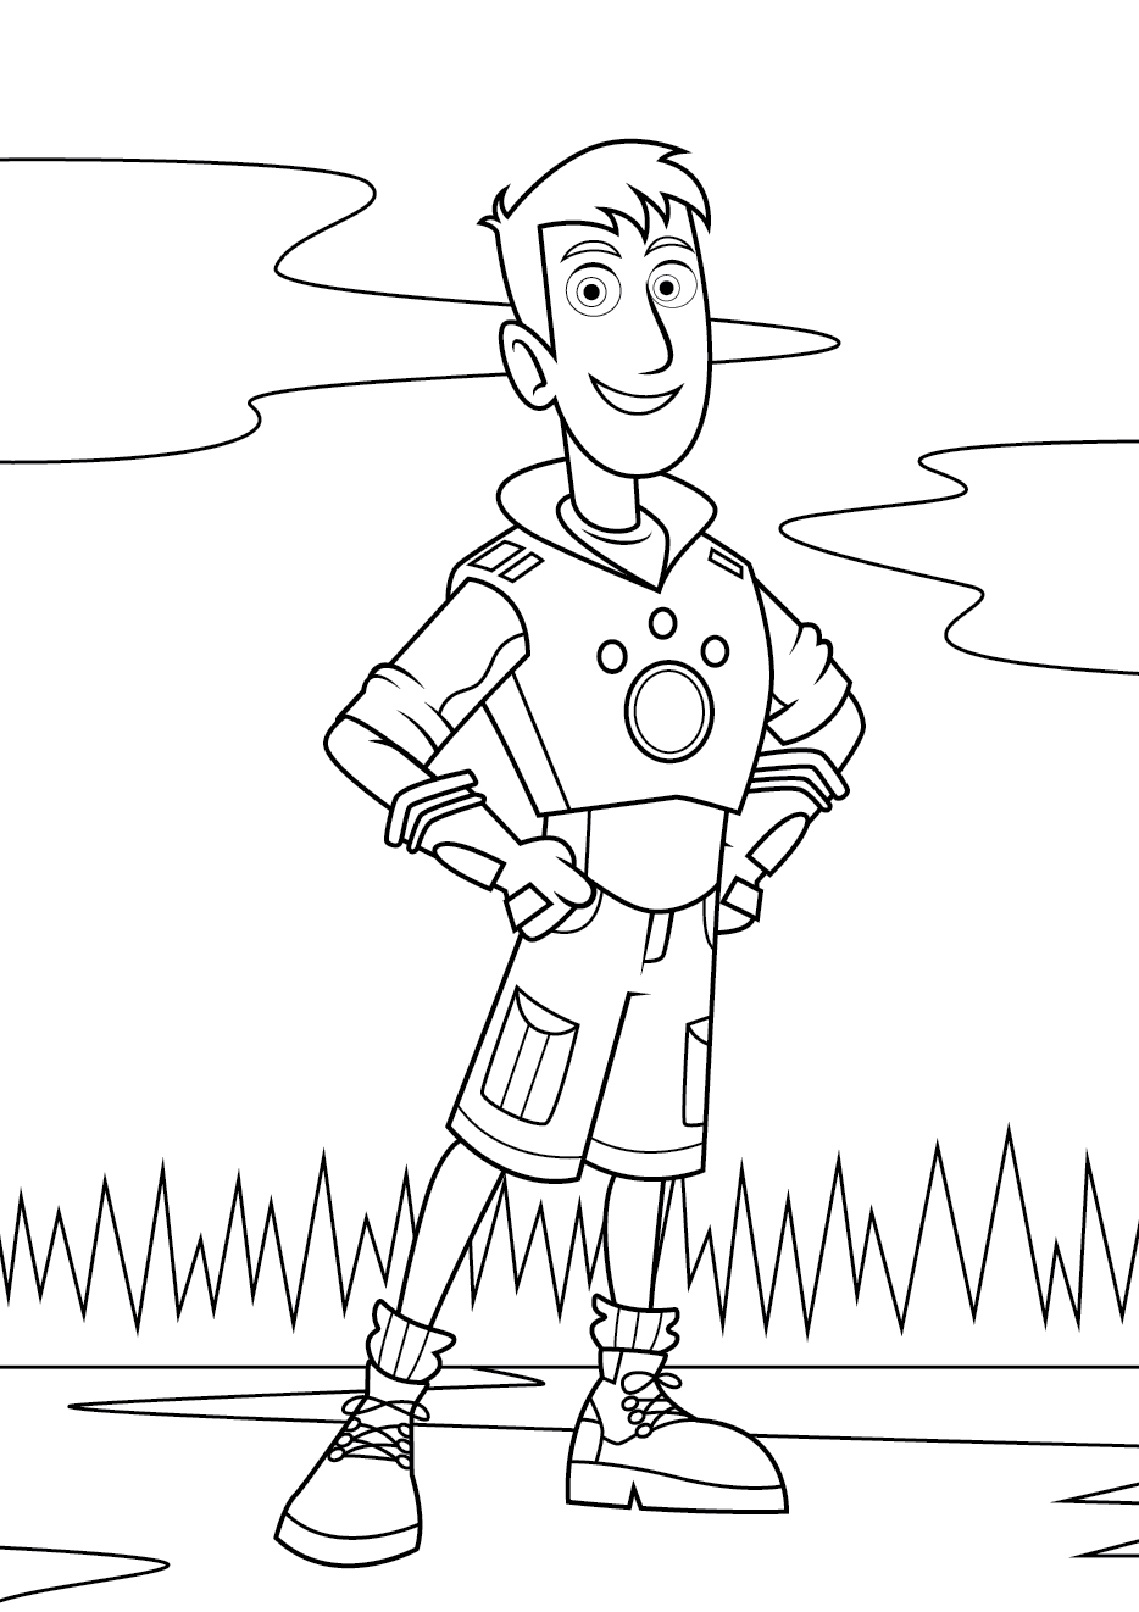 Printable Wild Kratts Coloring Page for kids.